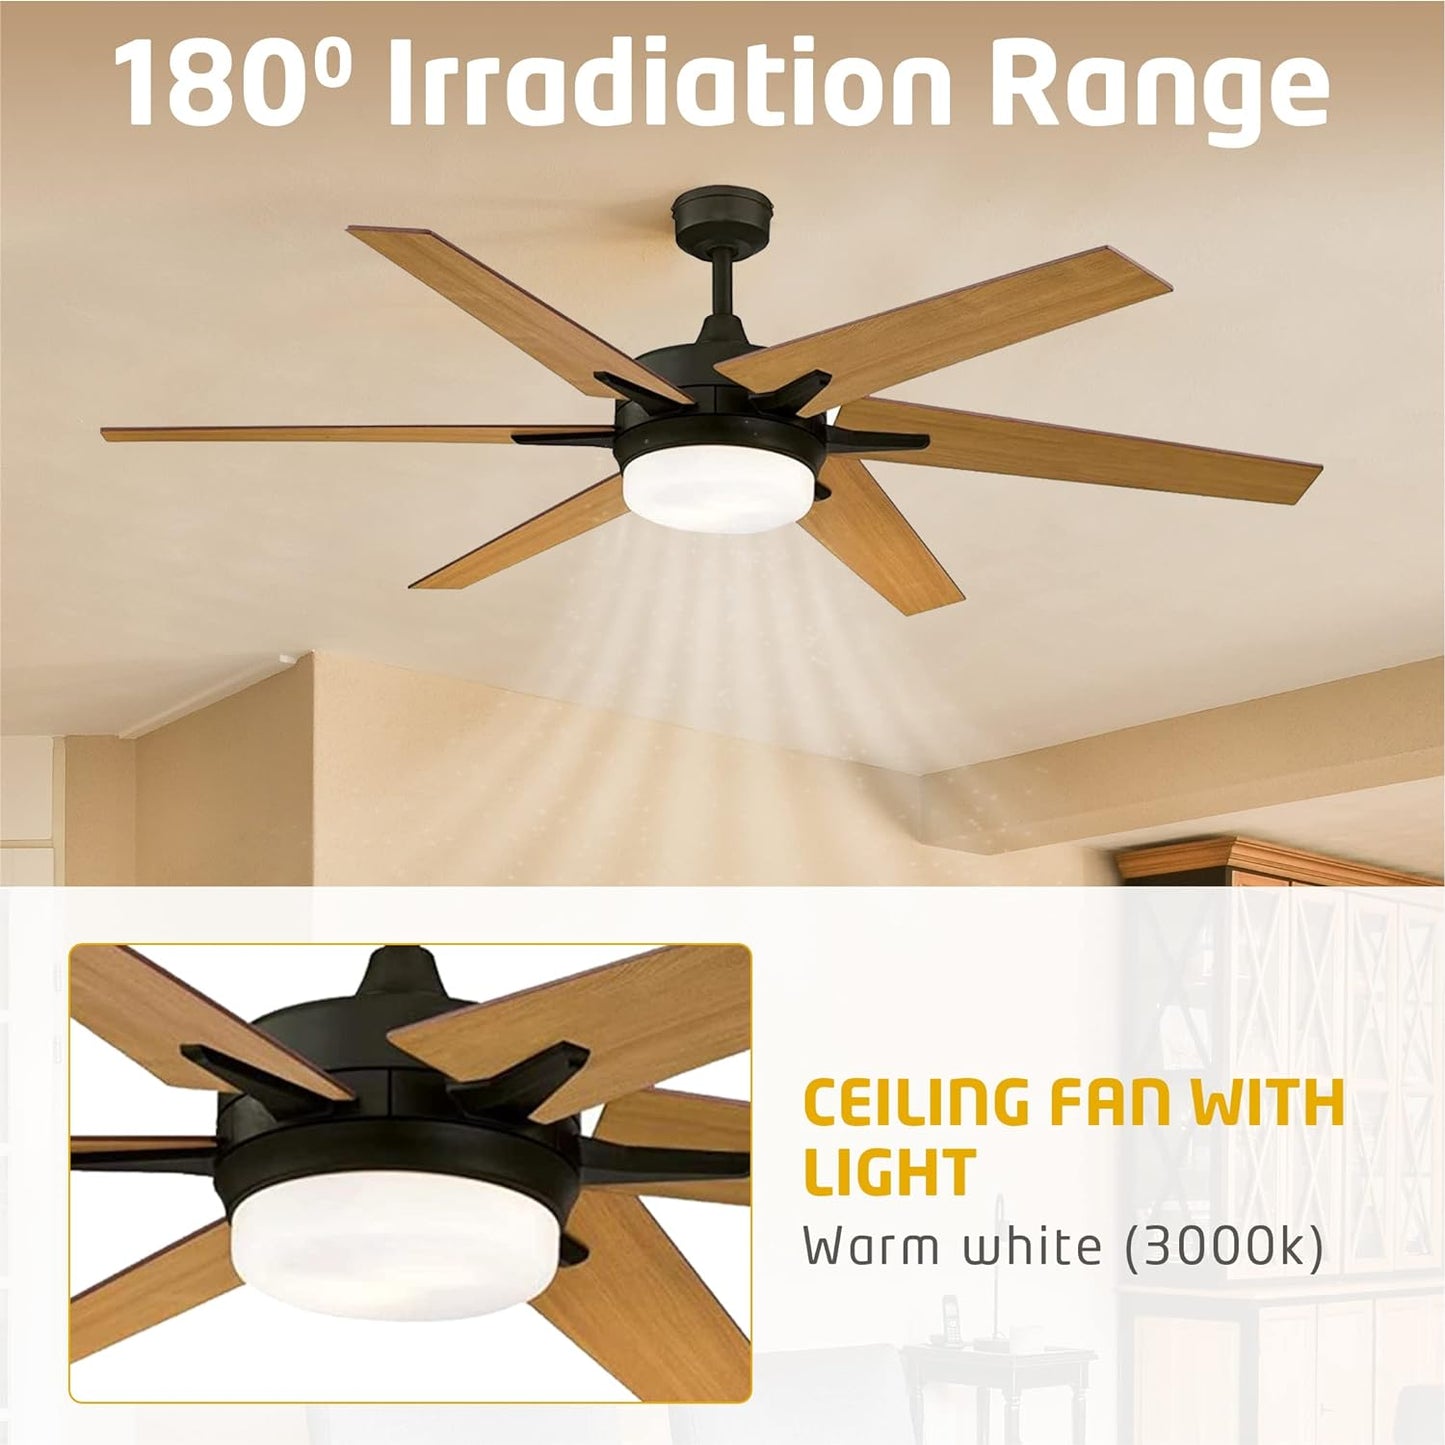 Ciata 60-inch Ceiling Fans with Lights  Smart Ceiling Fan for Bedroom/Living Room  Advanced Ceiling Fan with Remote Compatible with Alexa/Google Home  Wi-Fi Fans for Home  Black Bronze Finish (6